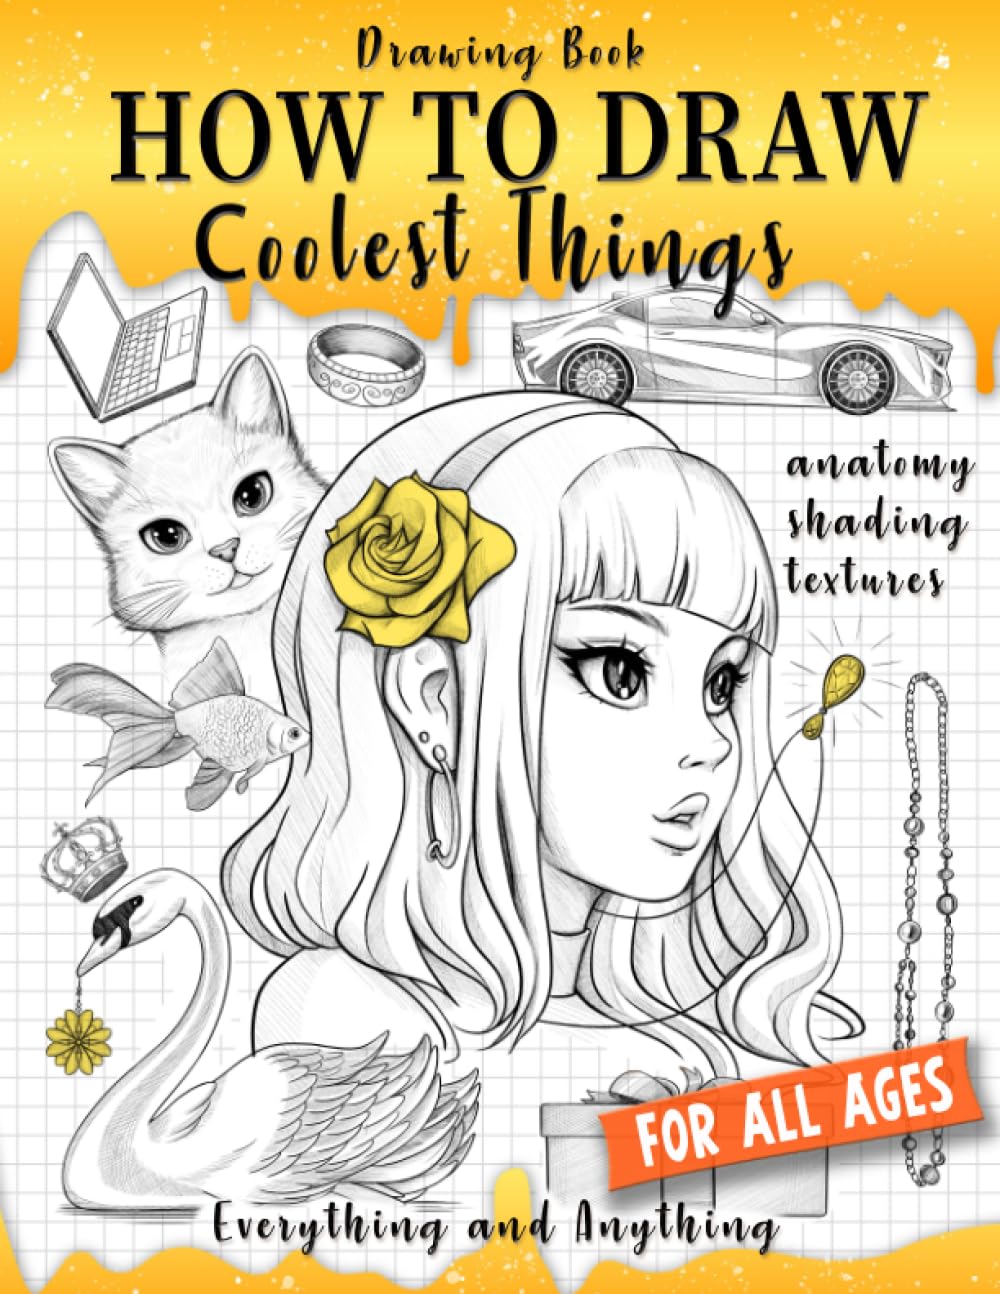 Drawing Book How to Draw Coolest Things Anatomy Shading Textures: This Drawing Guide Easy Way to Learn How to Draw. Basic and Beyond